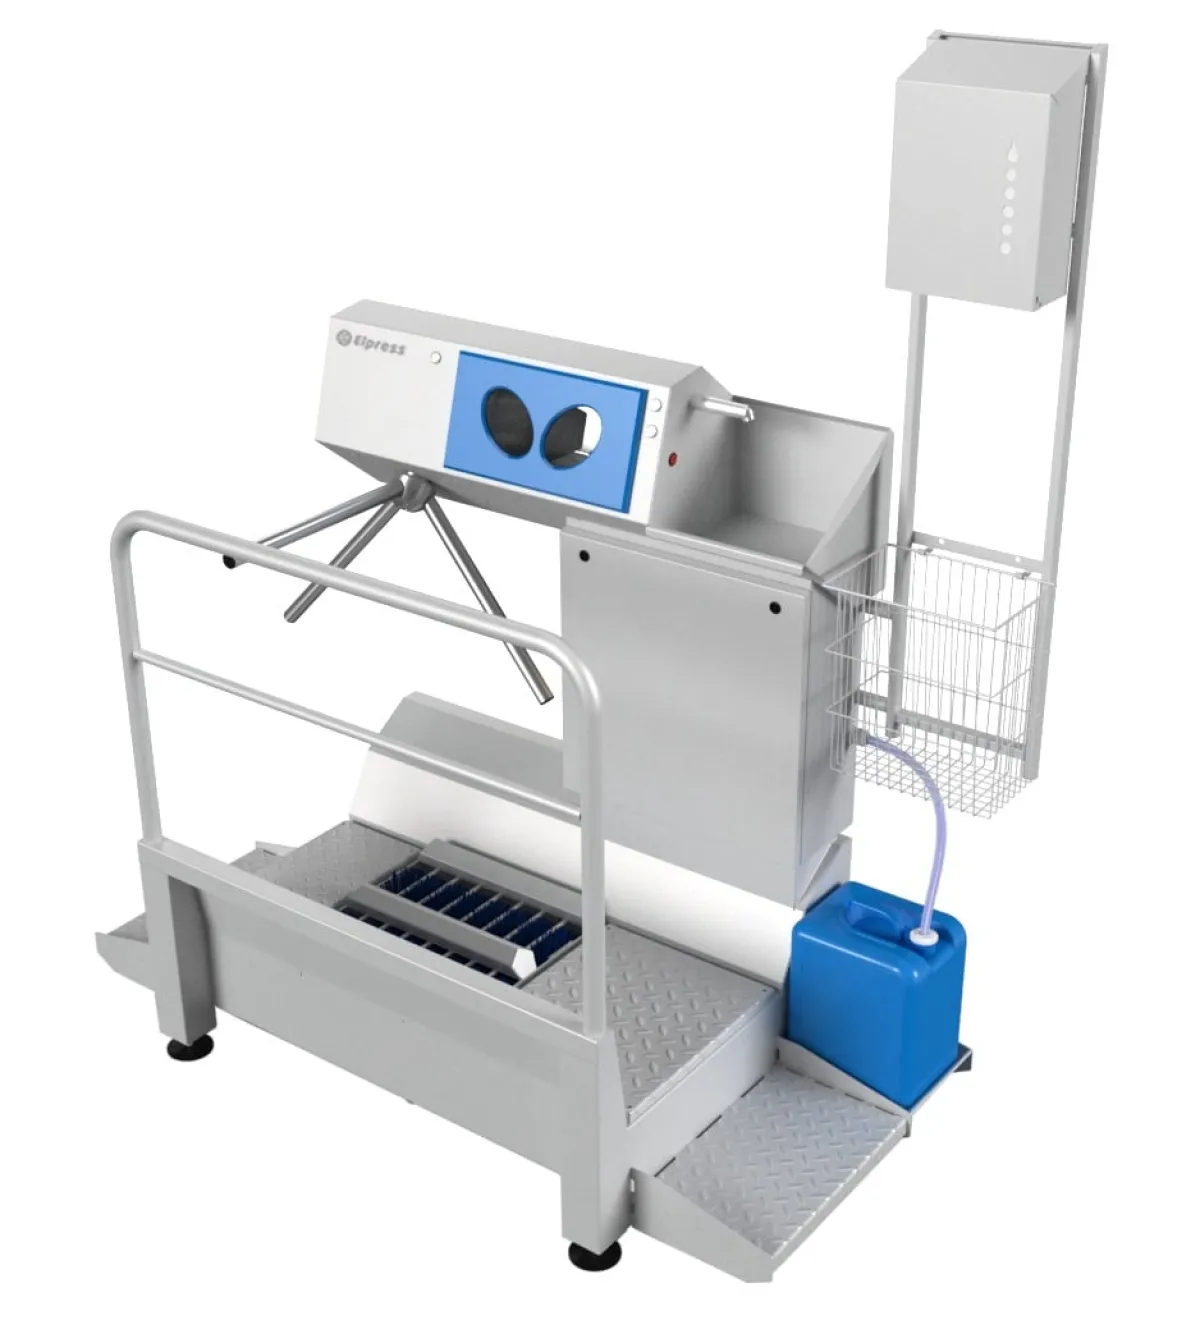 Sole cleaning / disinfection, hand washing and hand disinfection